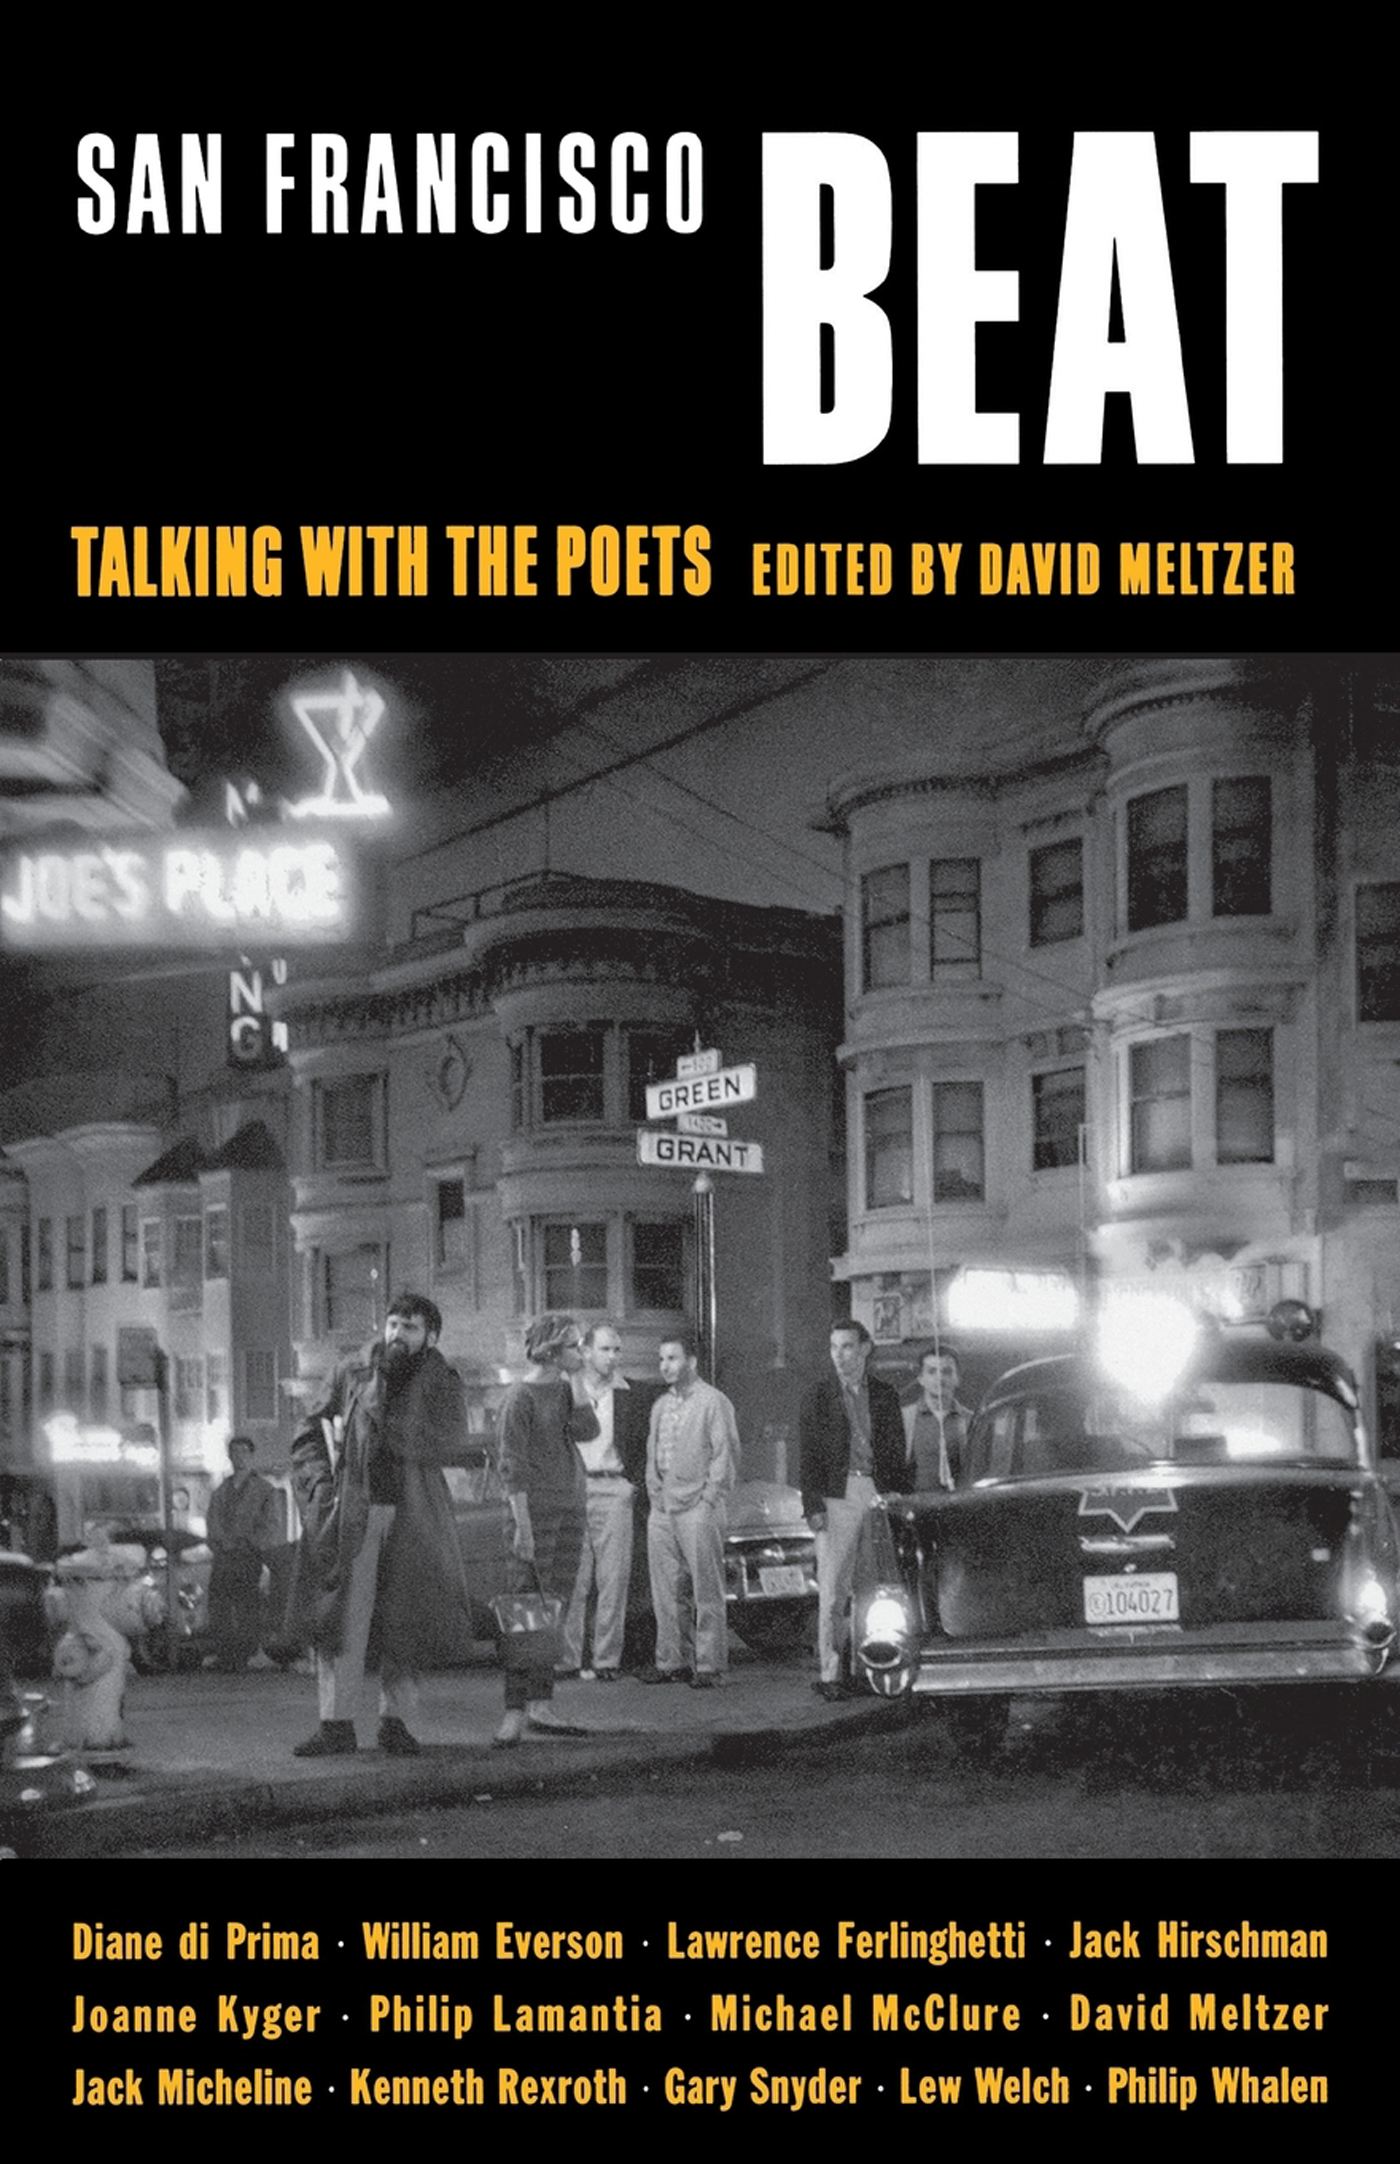 San Francisco Beat Talking with the Poets Edited by David Meltzer 2001 by - photo 1